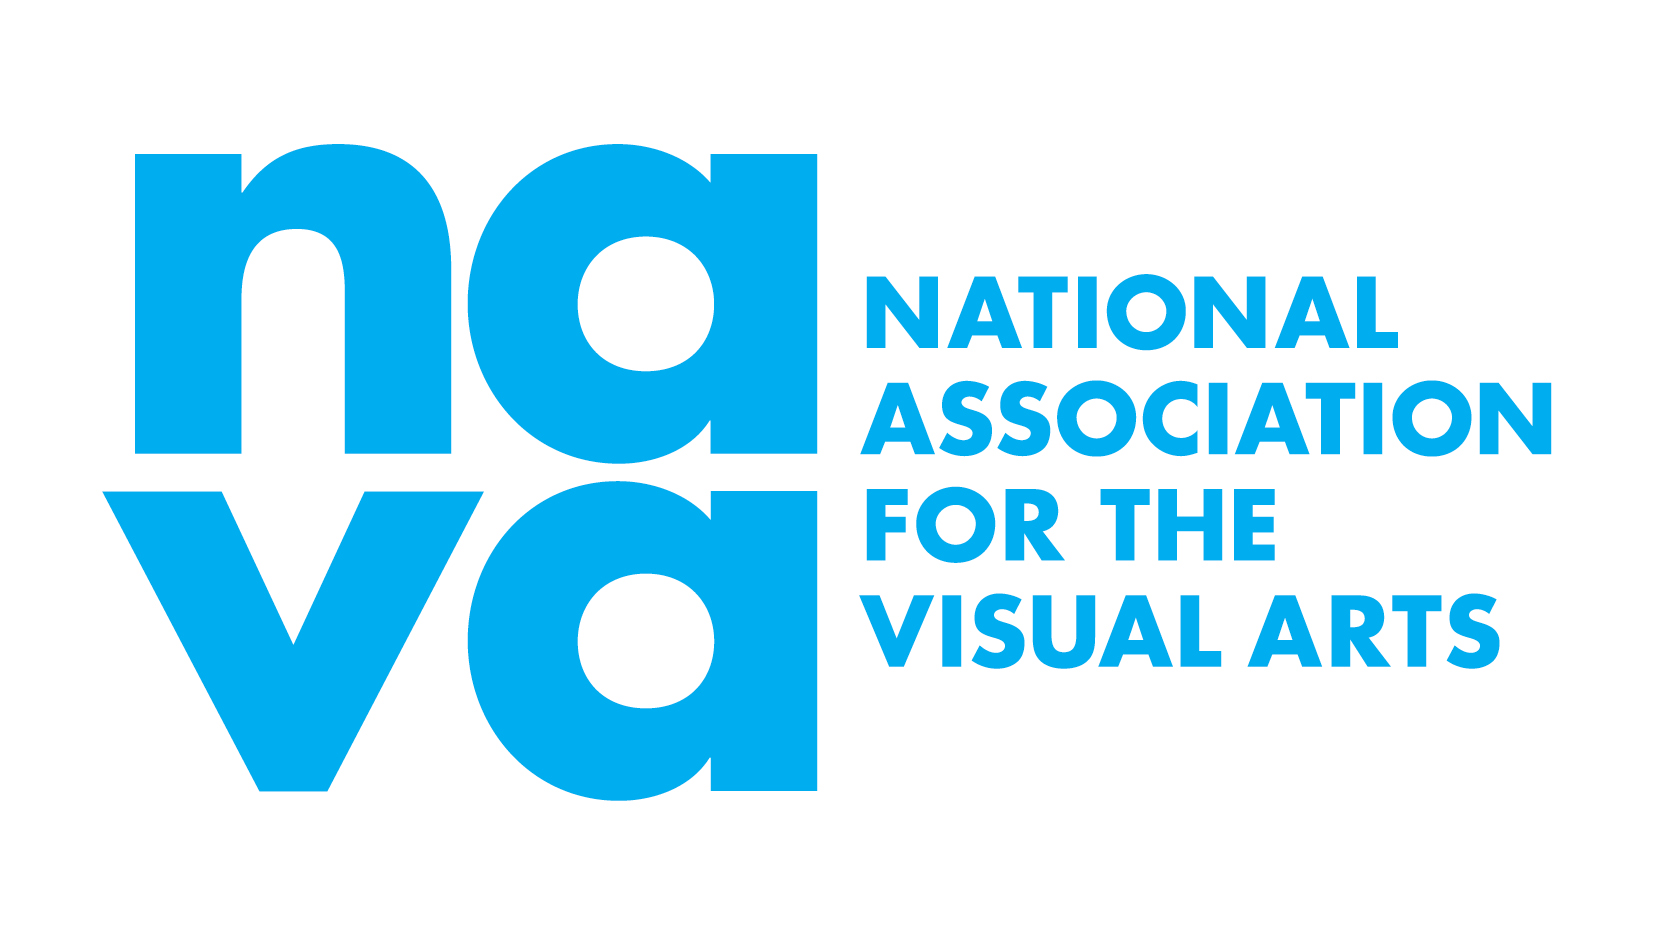 Visit the National Association for the Visual Arts' website